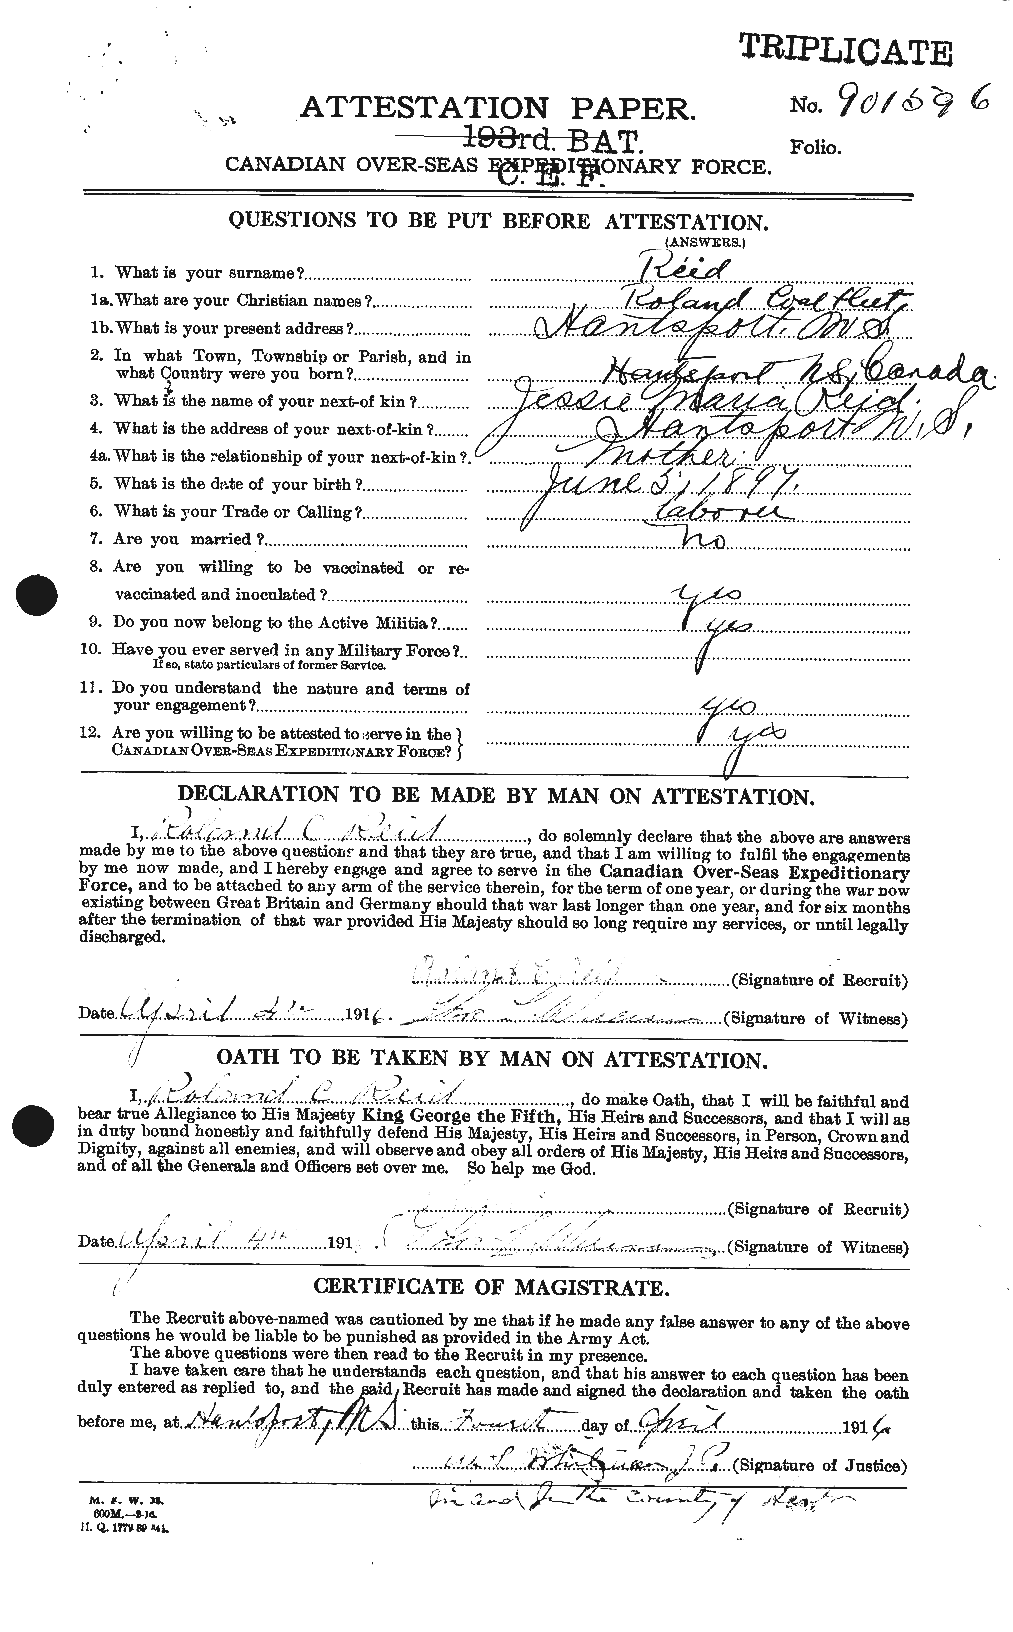 Personnel Records of the First World War - CEF 601930a